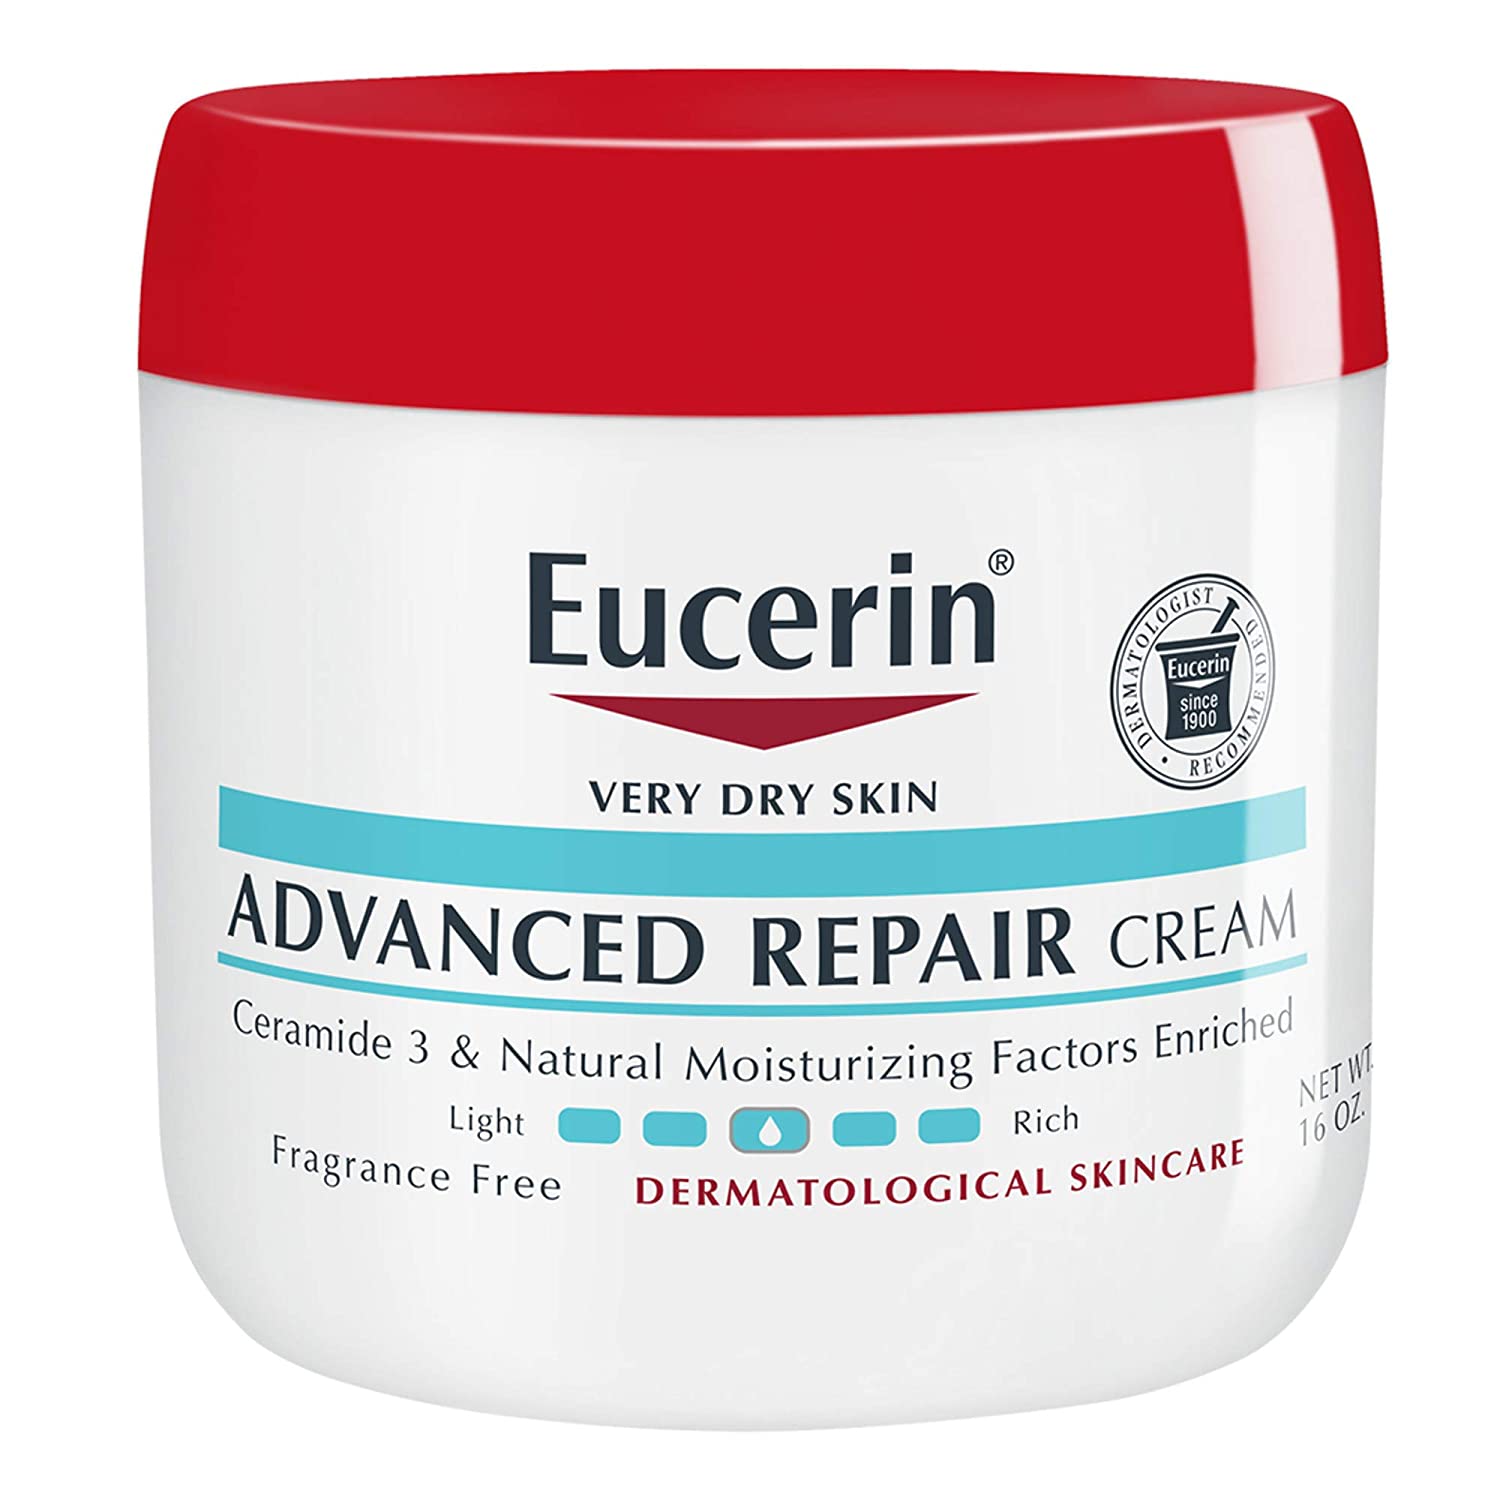 16-Oz Eucerin Advanced Repair Cream (Very Dry Skin) $6.75 w/ S&S + Free Shipping w/ Prime or on $25+